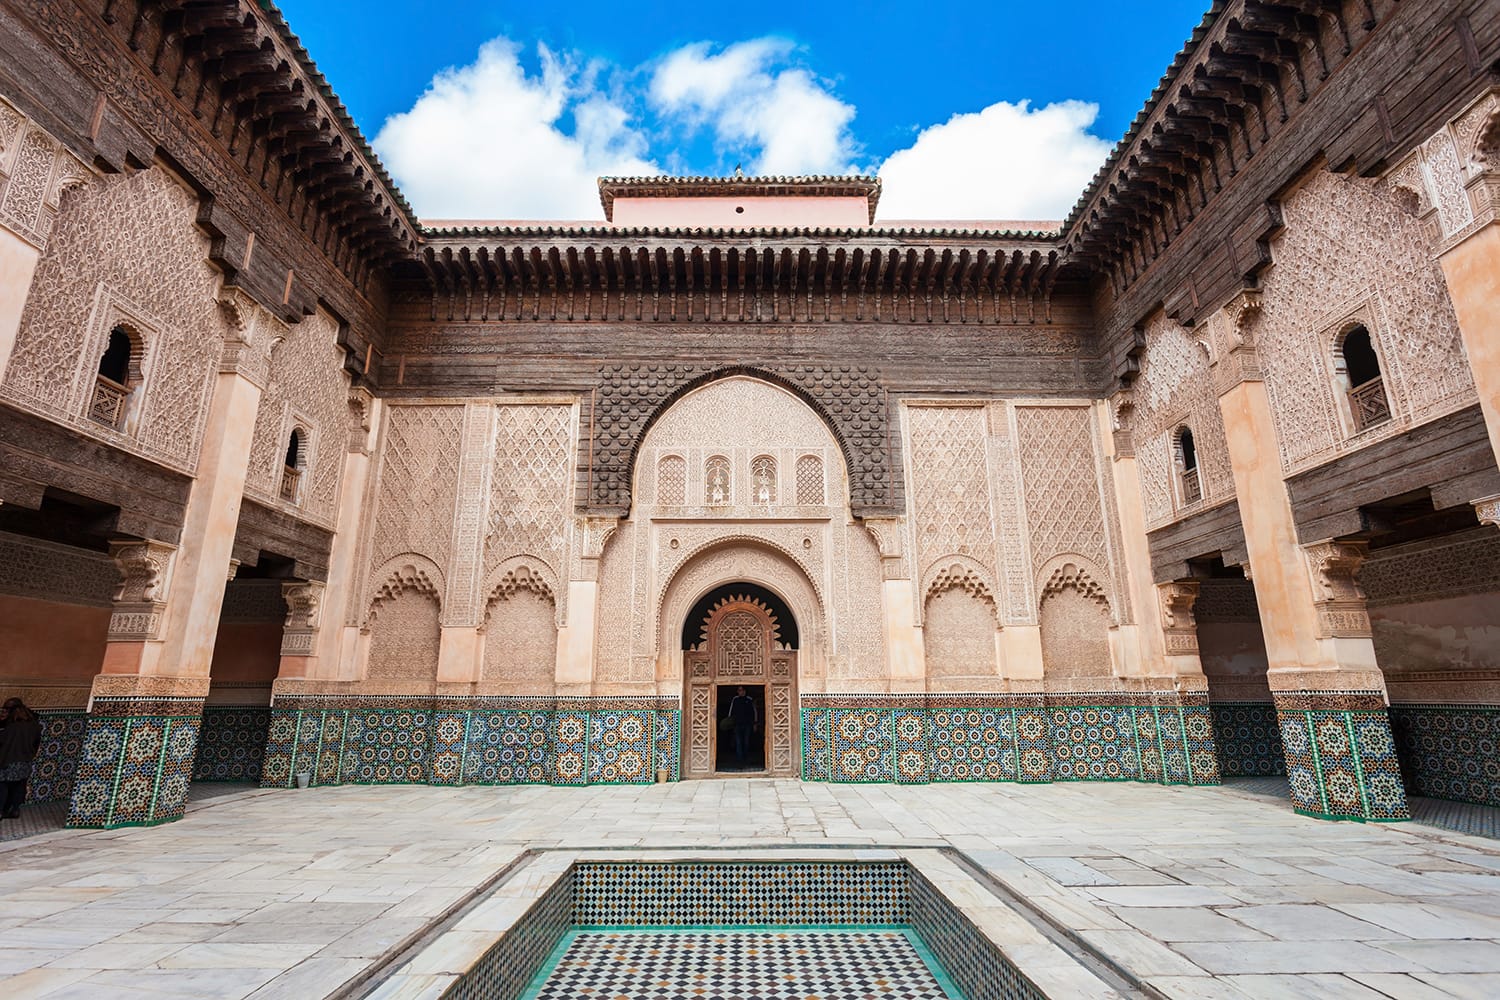 The Ben Youssef Medersa is an Islamic college in Marrakesh, Morocco, it is the largest Medrasa in Morocco.